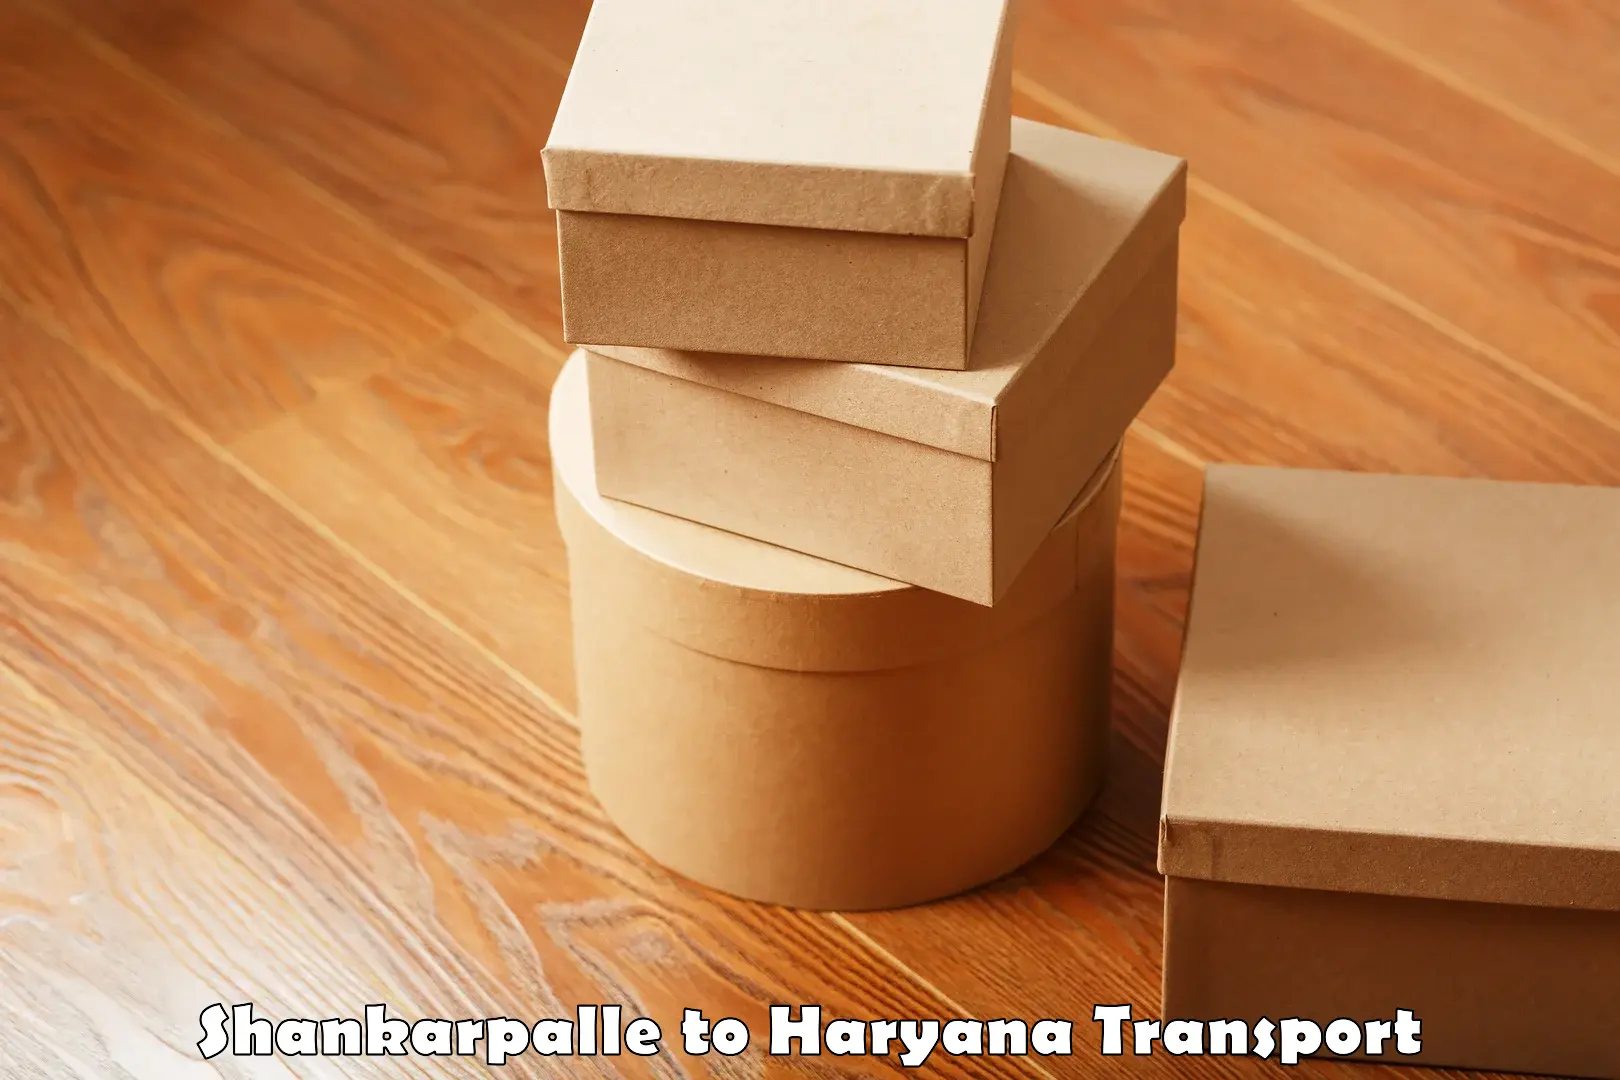 Material transport services Shankarpalle to NCR Haryana